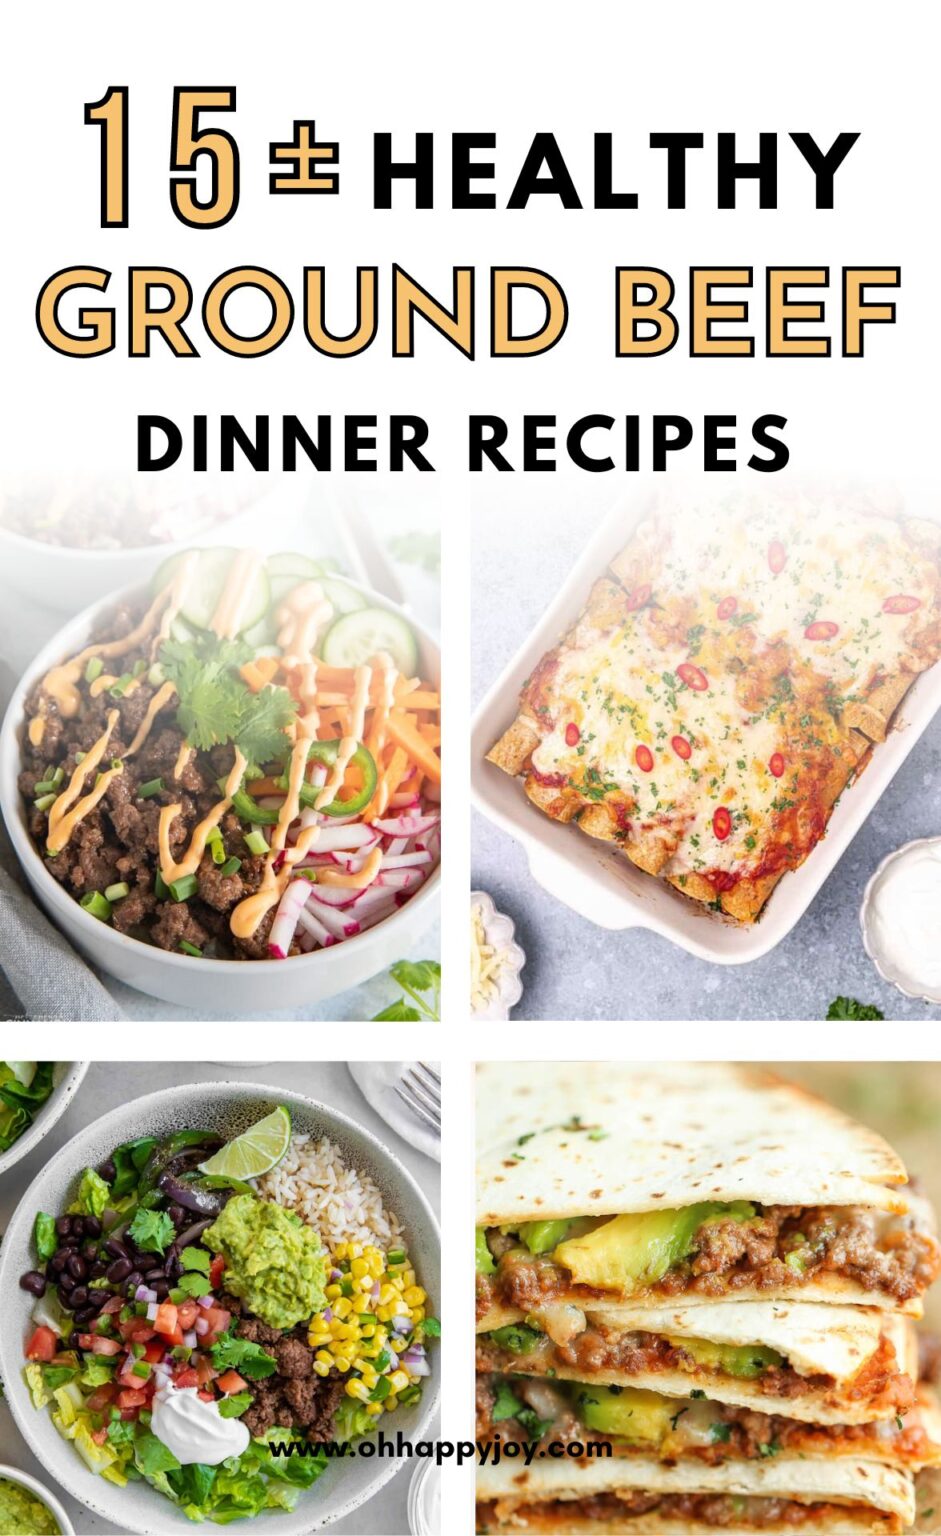 Healthy Ground Beef Recipes for Dinner - Oh Happy Joy!